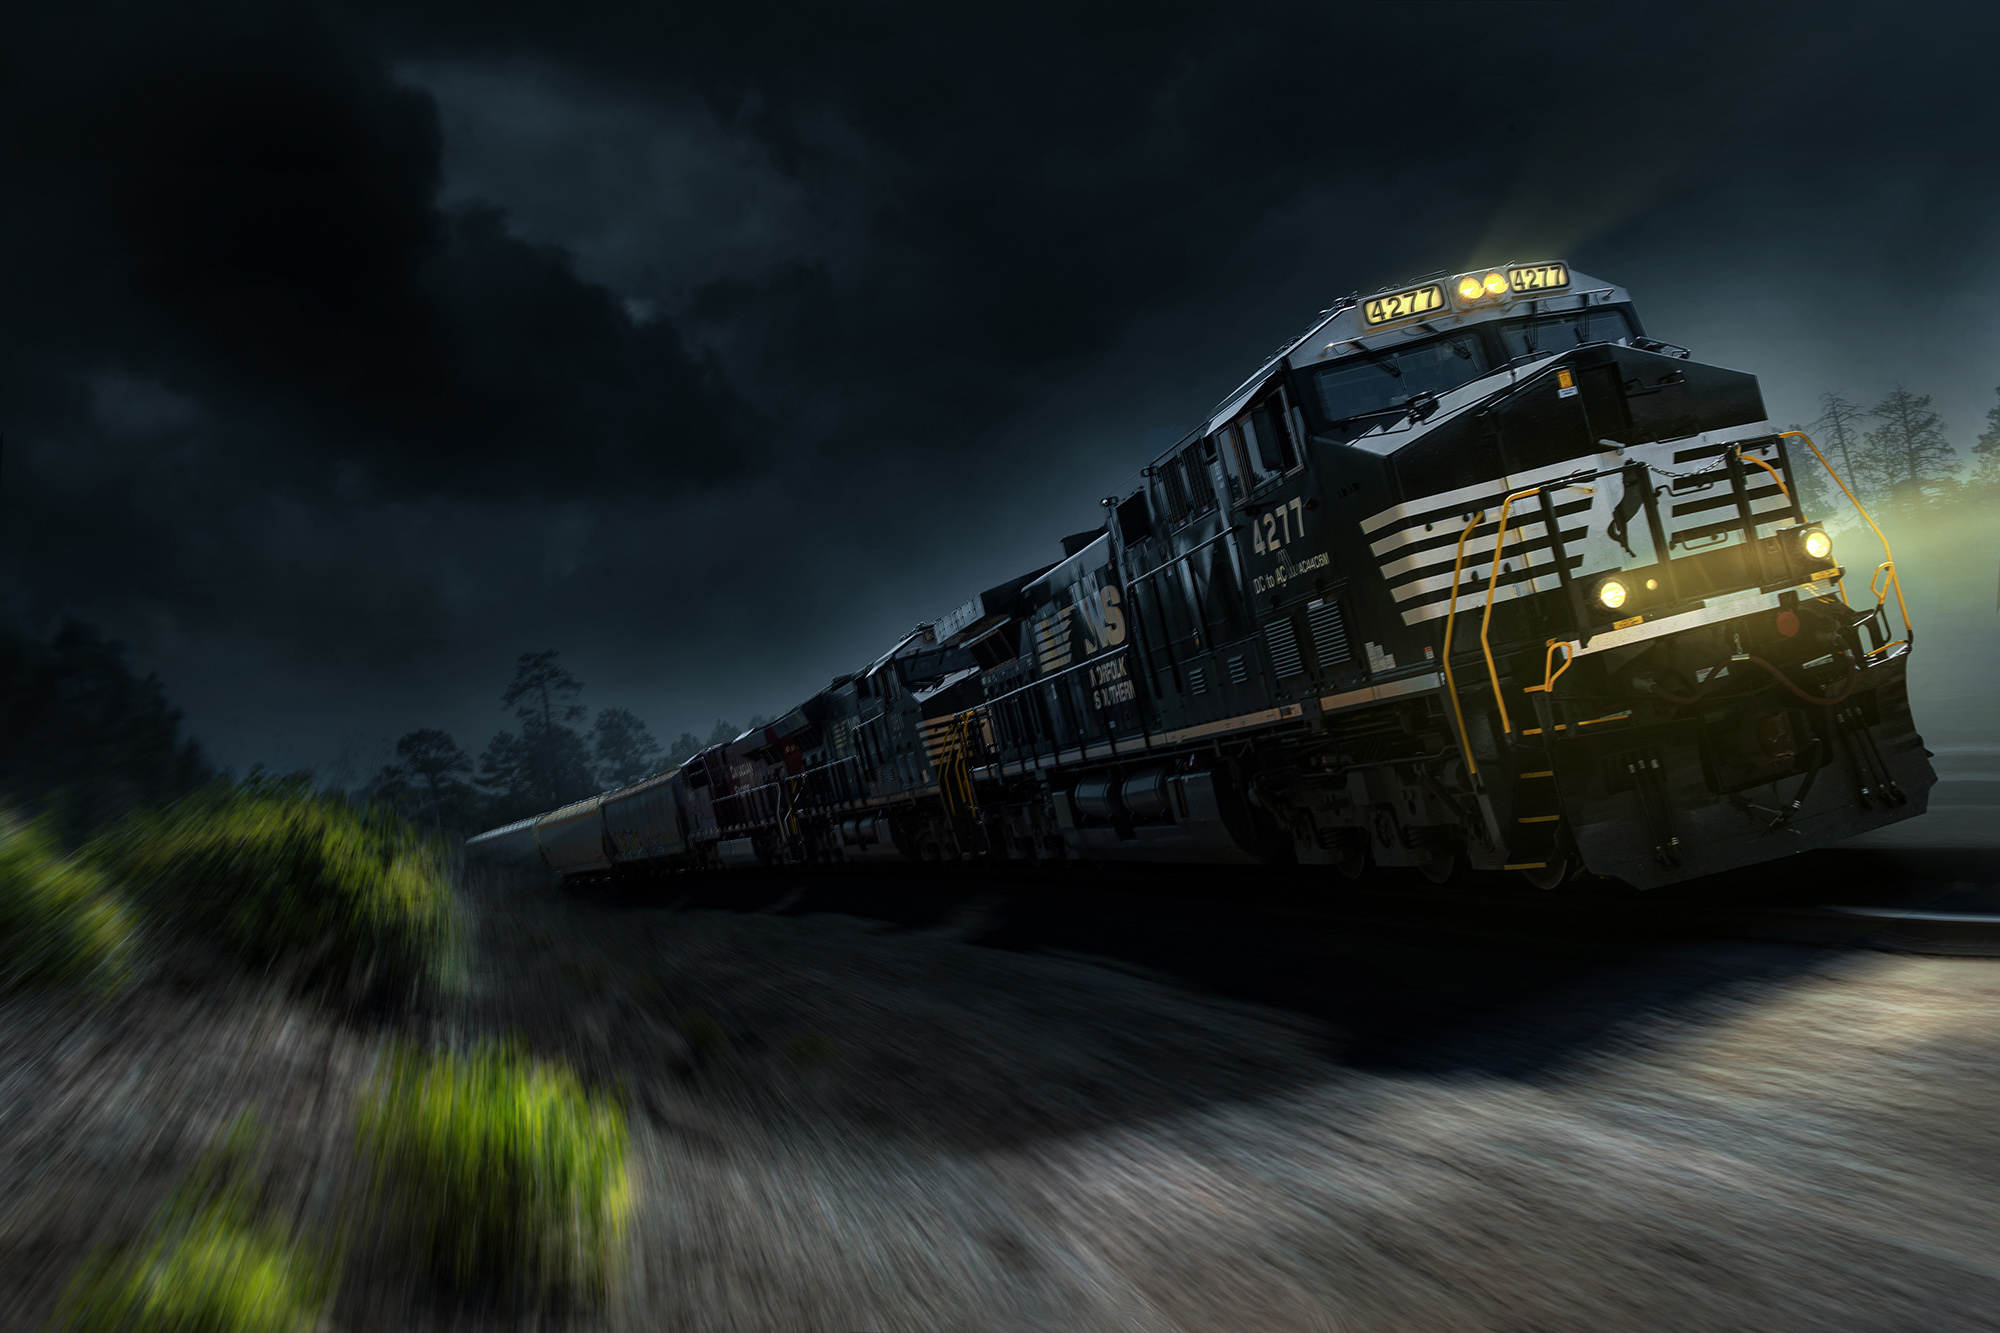 Norfolk Southern Freight Train photographed by Advertising Photographer Blair Bunting in Arizona